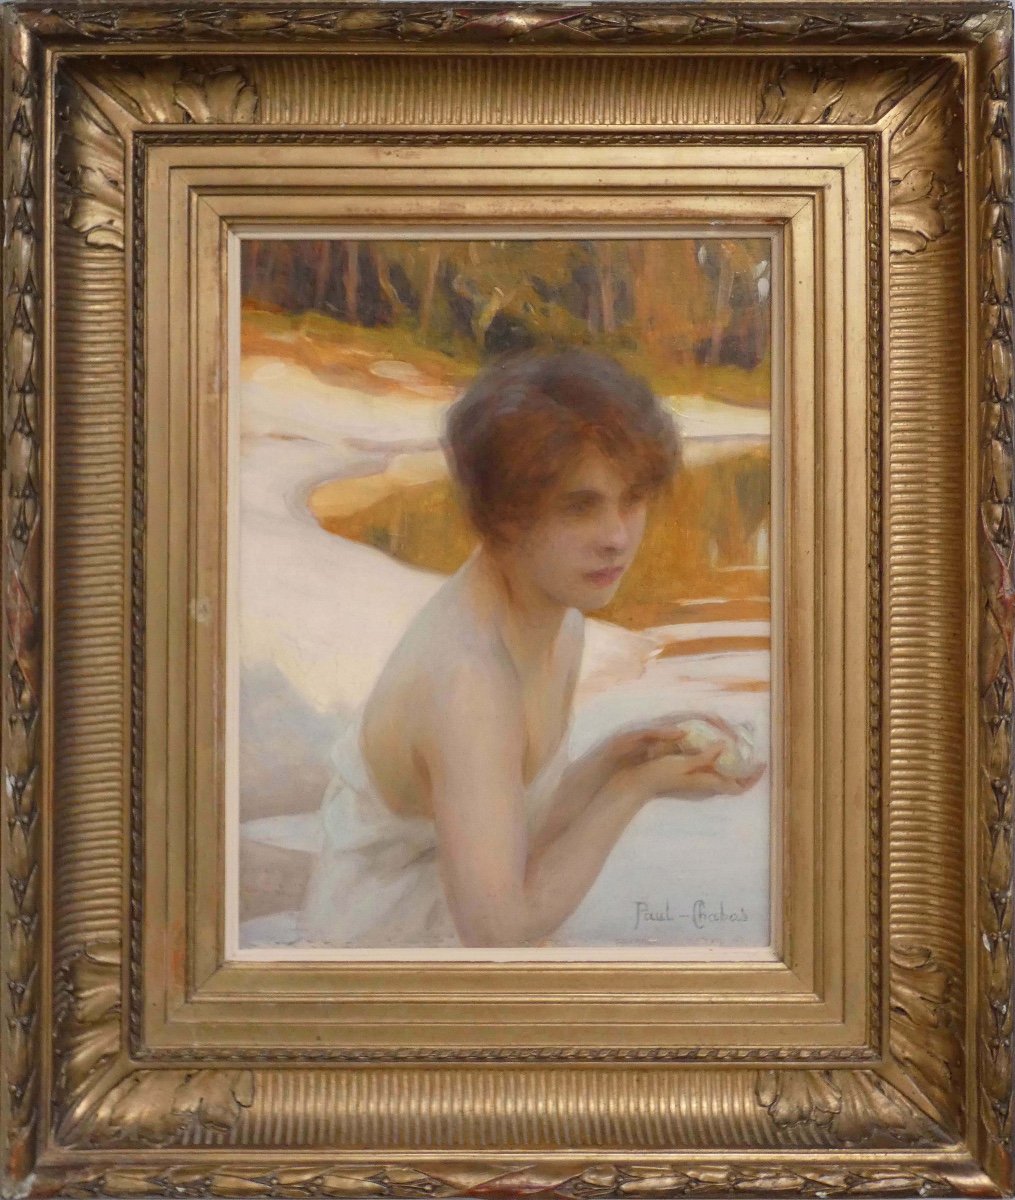 Paul Chabas, The Young Girl With The Shell Circa 1910 - Symbolism-photo-1